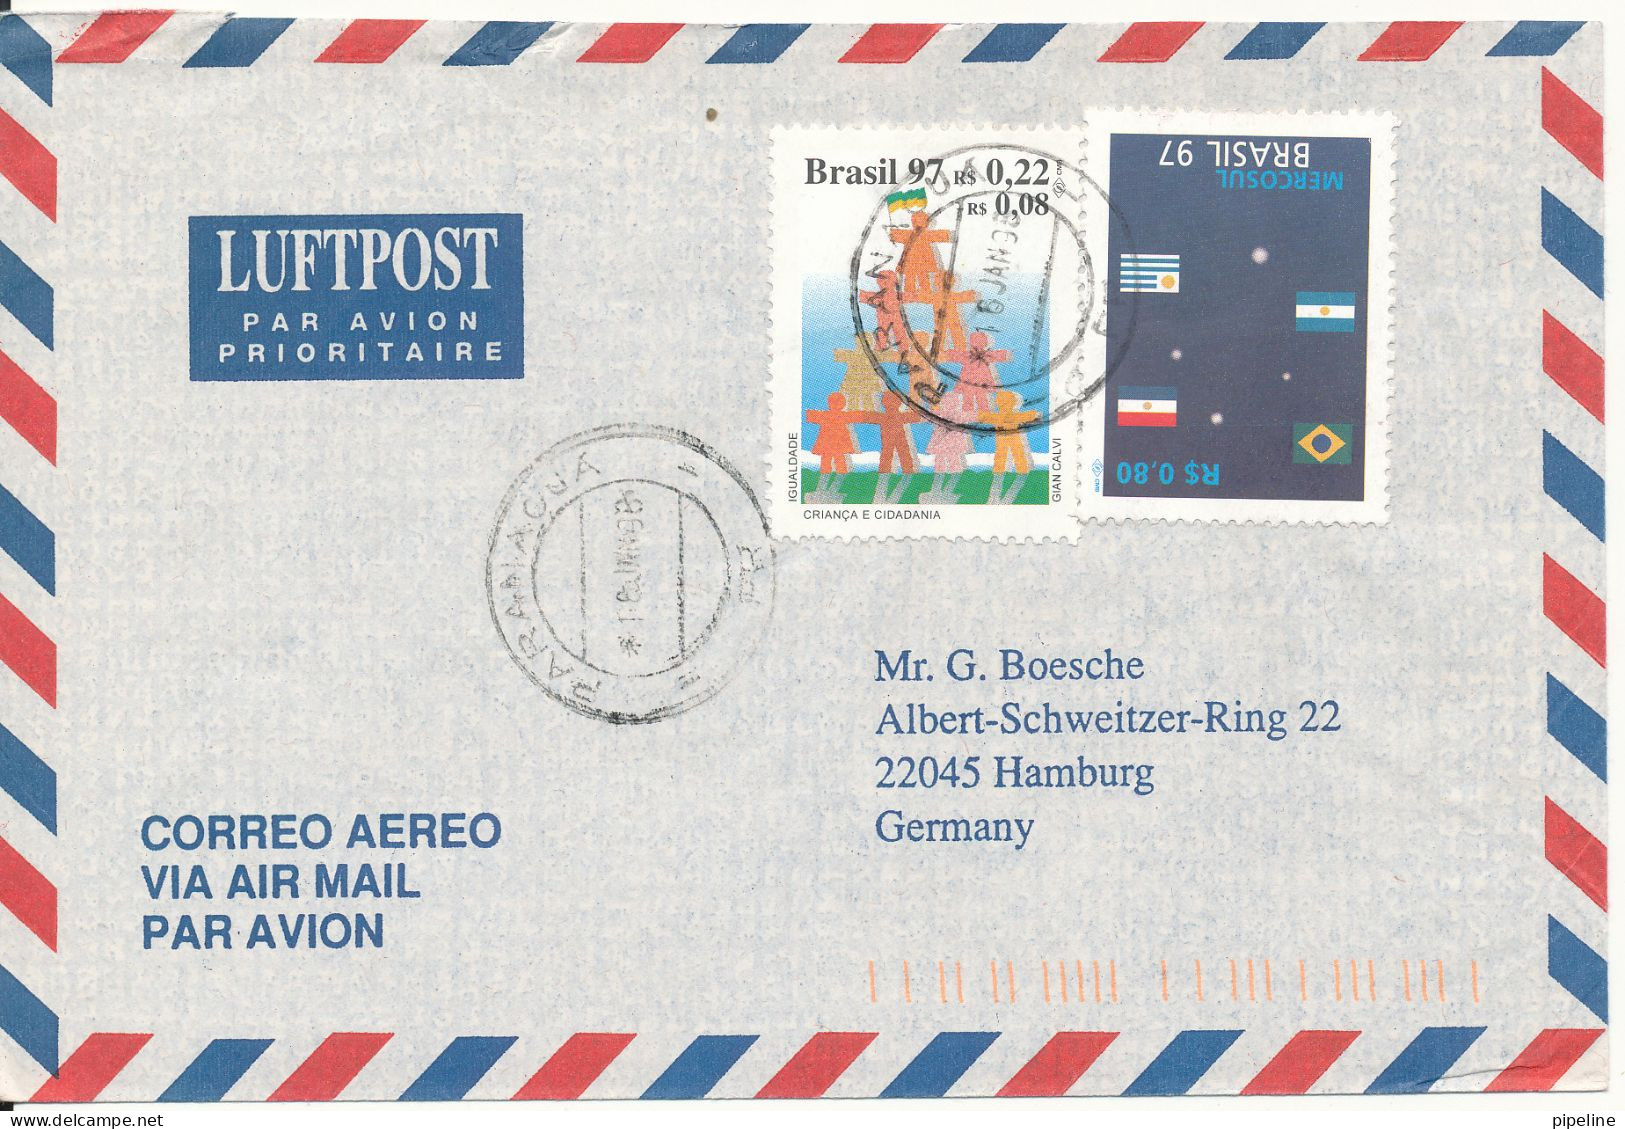 Brazil Air Mail Cover Sent To Germany 16-1-1998 Topic Stamps - Luftpost